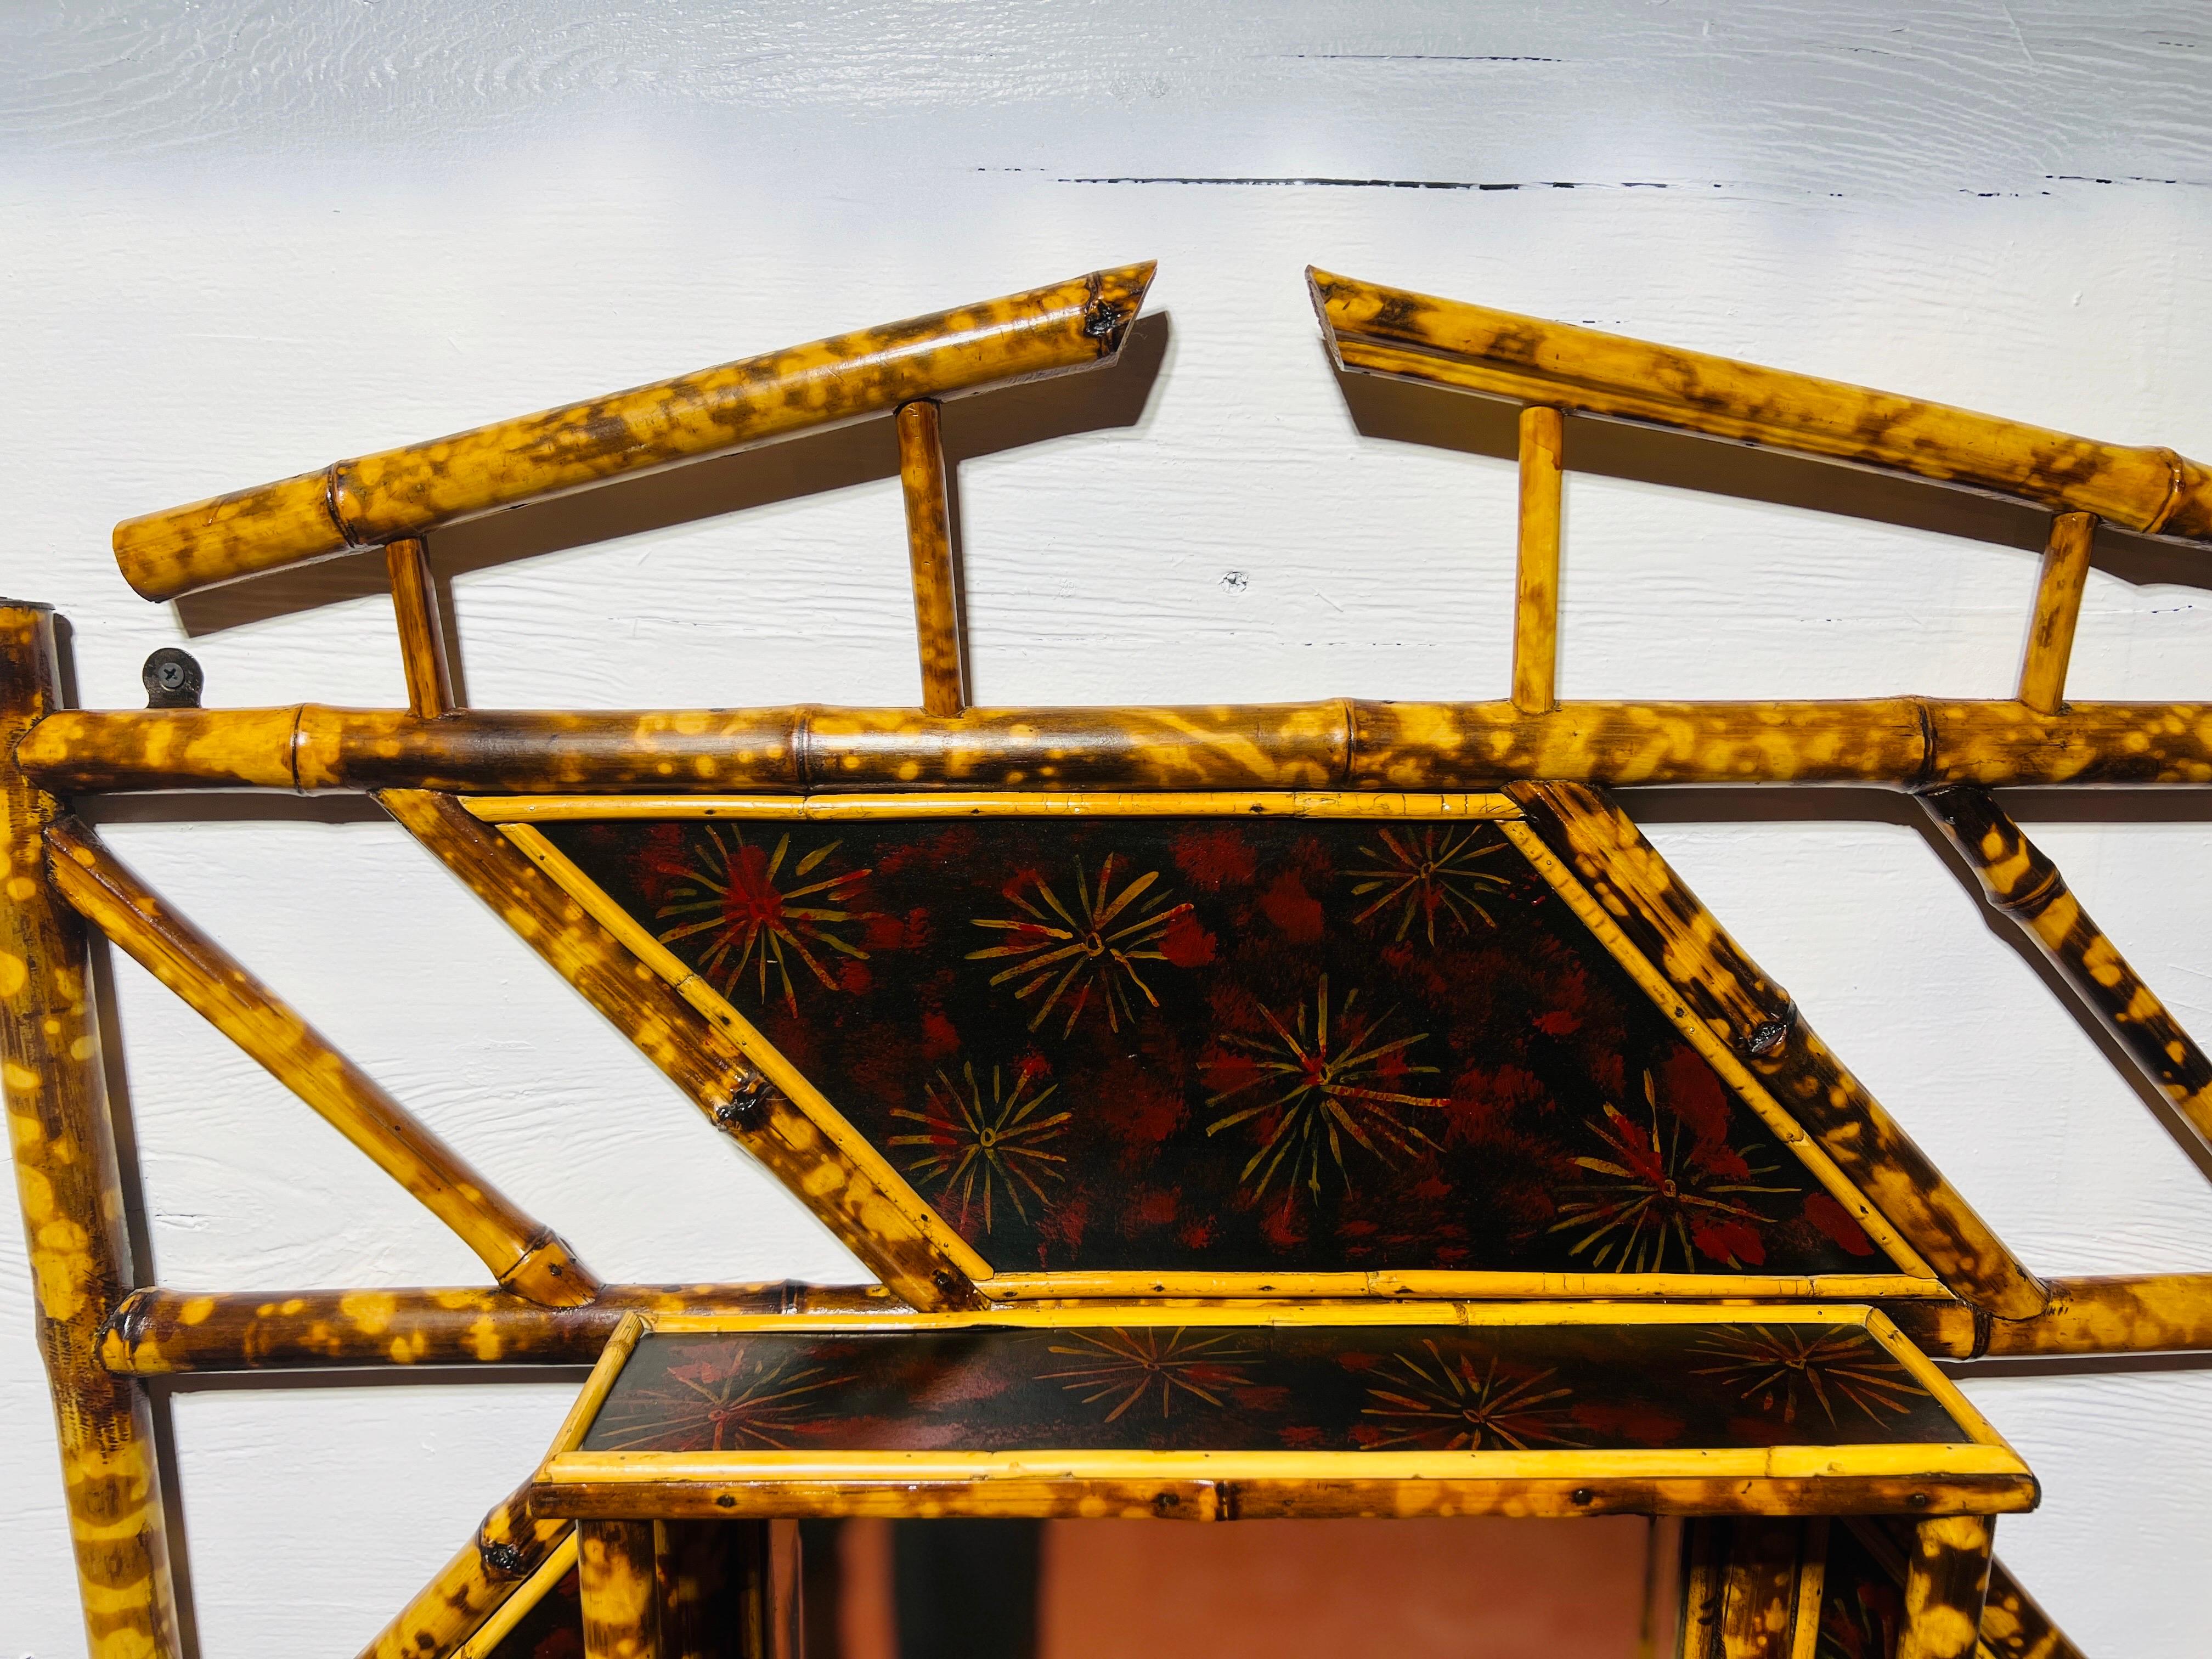 English, late 19th century. A fantastic 19th century Victorian era bamboo wall mirror decorated with chinoiserie lacquer detailing and three sturdy shelves. The bamboo frame is sturdy with a 